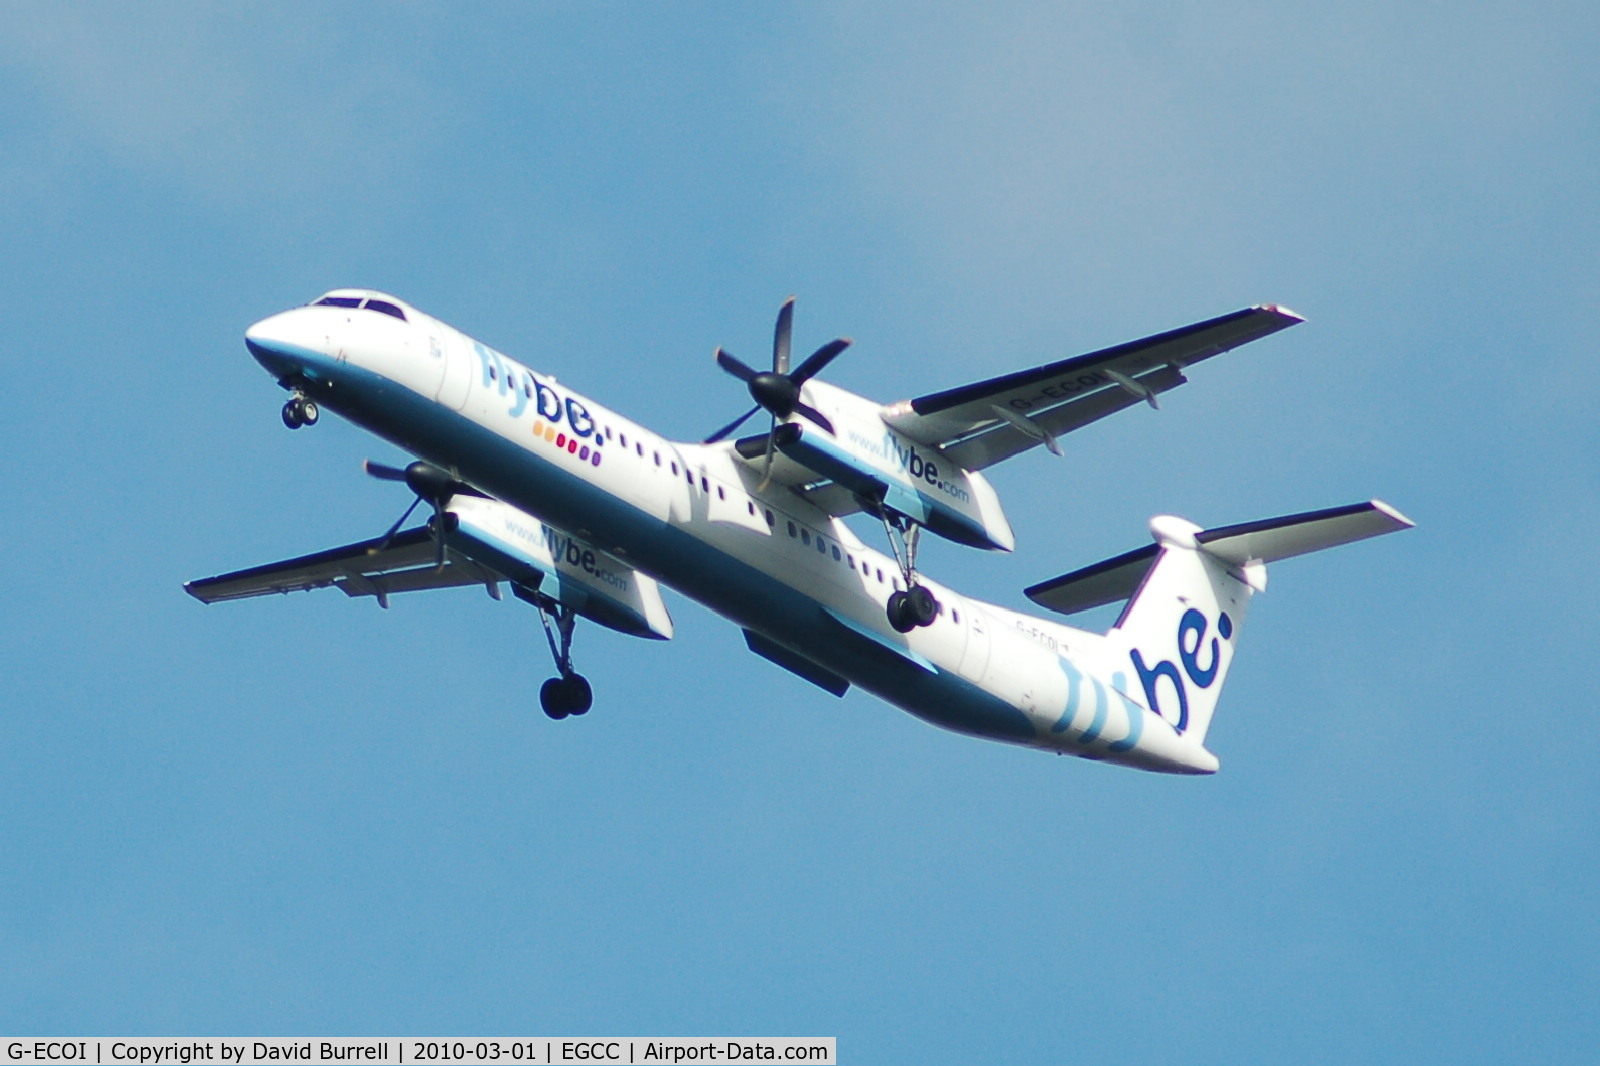 G-ECOI, 2008 De Havilland Canada DHC-8-402Q Dash 8 C/N 4224, Flybe G-ECOI on approach to Manchester Airport